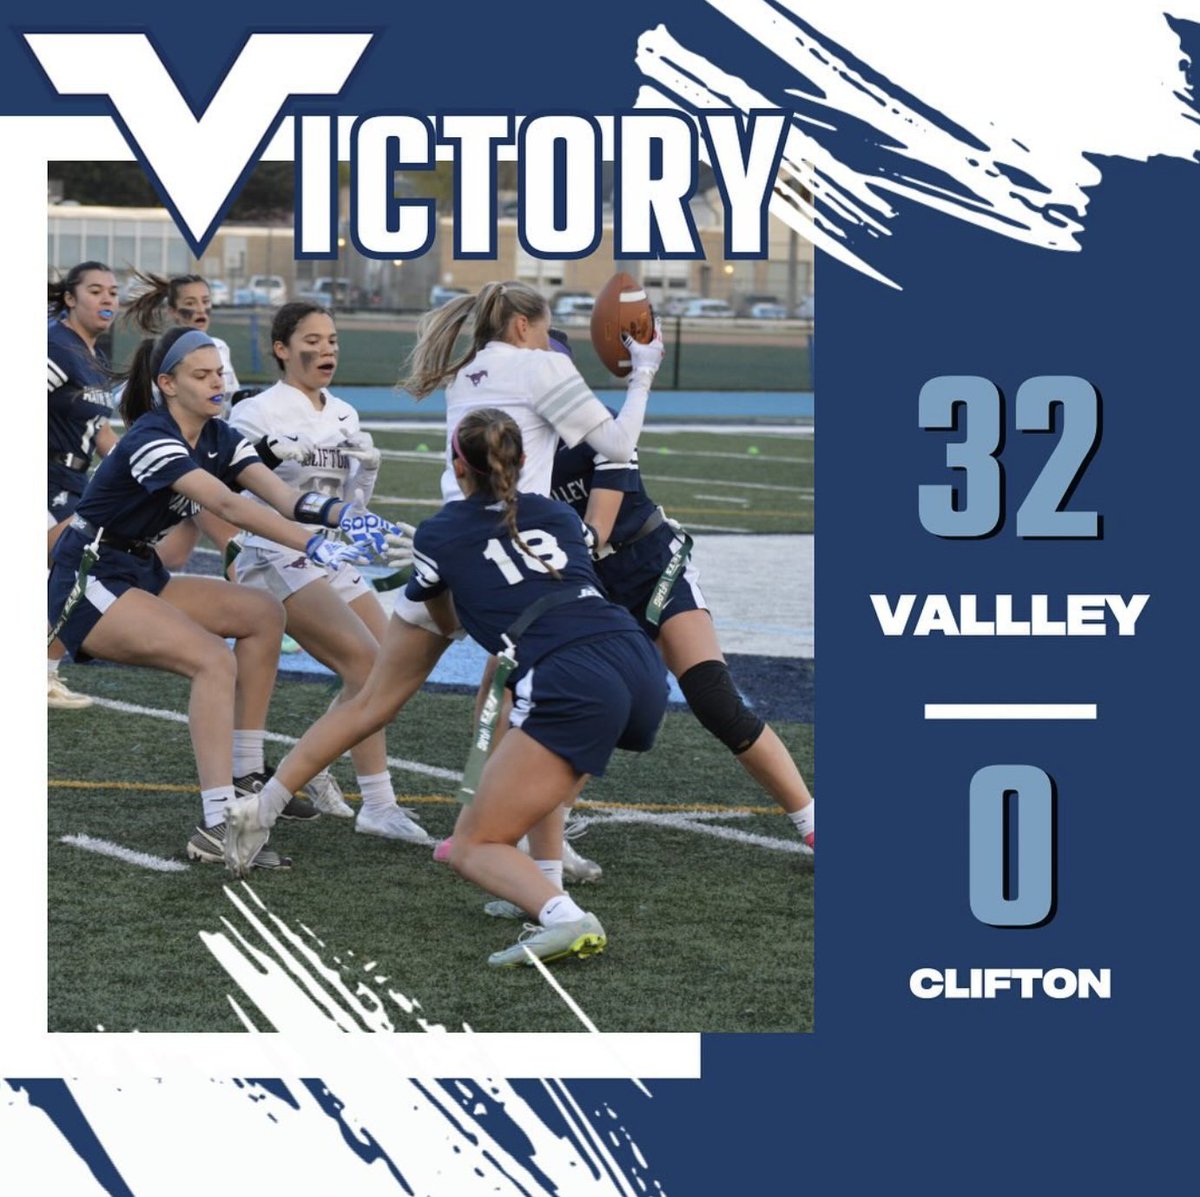 Big win last night by #5 ranked Wayne Valley over #7 ranked Clifton 32-0. The defense had 4 Interceptions and the offense passed for 4 TD's. Onto the next big game vs #6 ranked West Milford, Saturday 2:30 PM at WVHS. @wvalleyathletic @SFCFootballNJ @VarsityAces